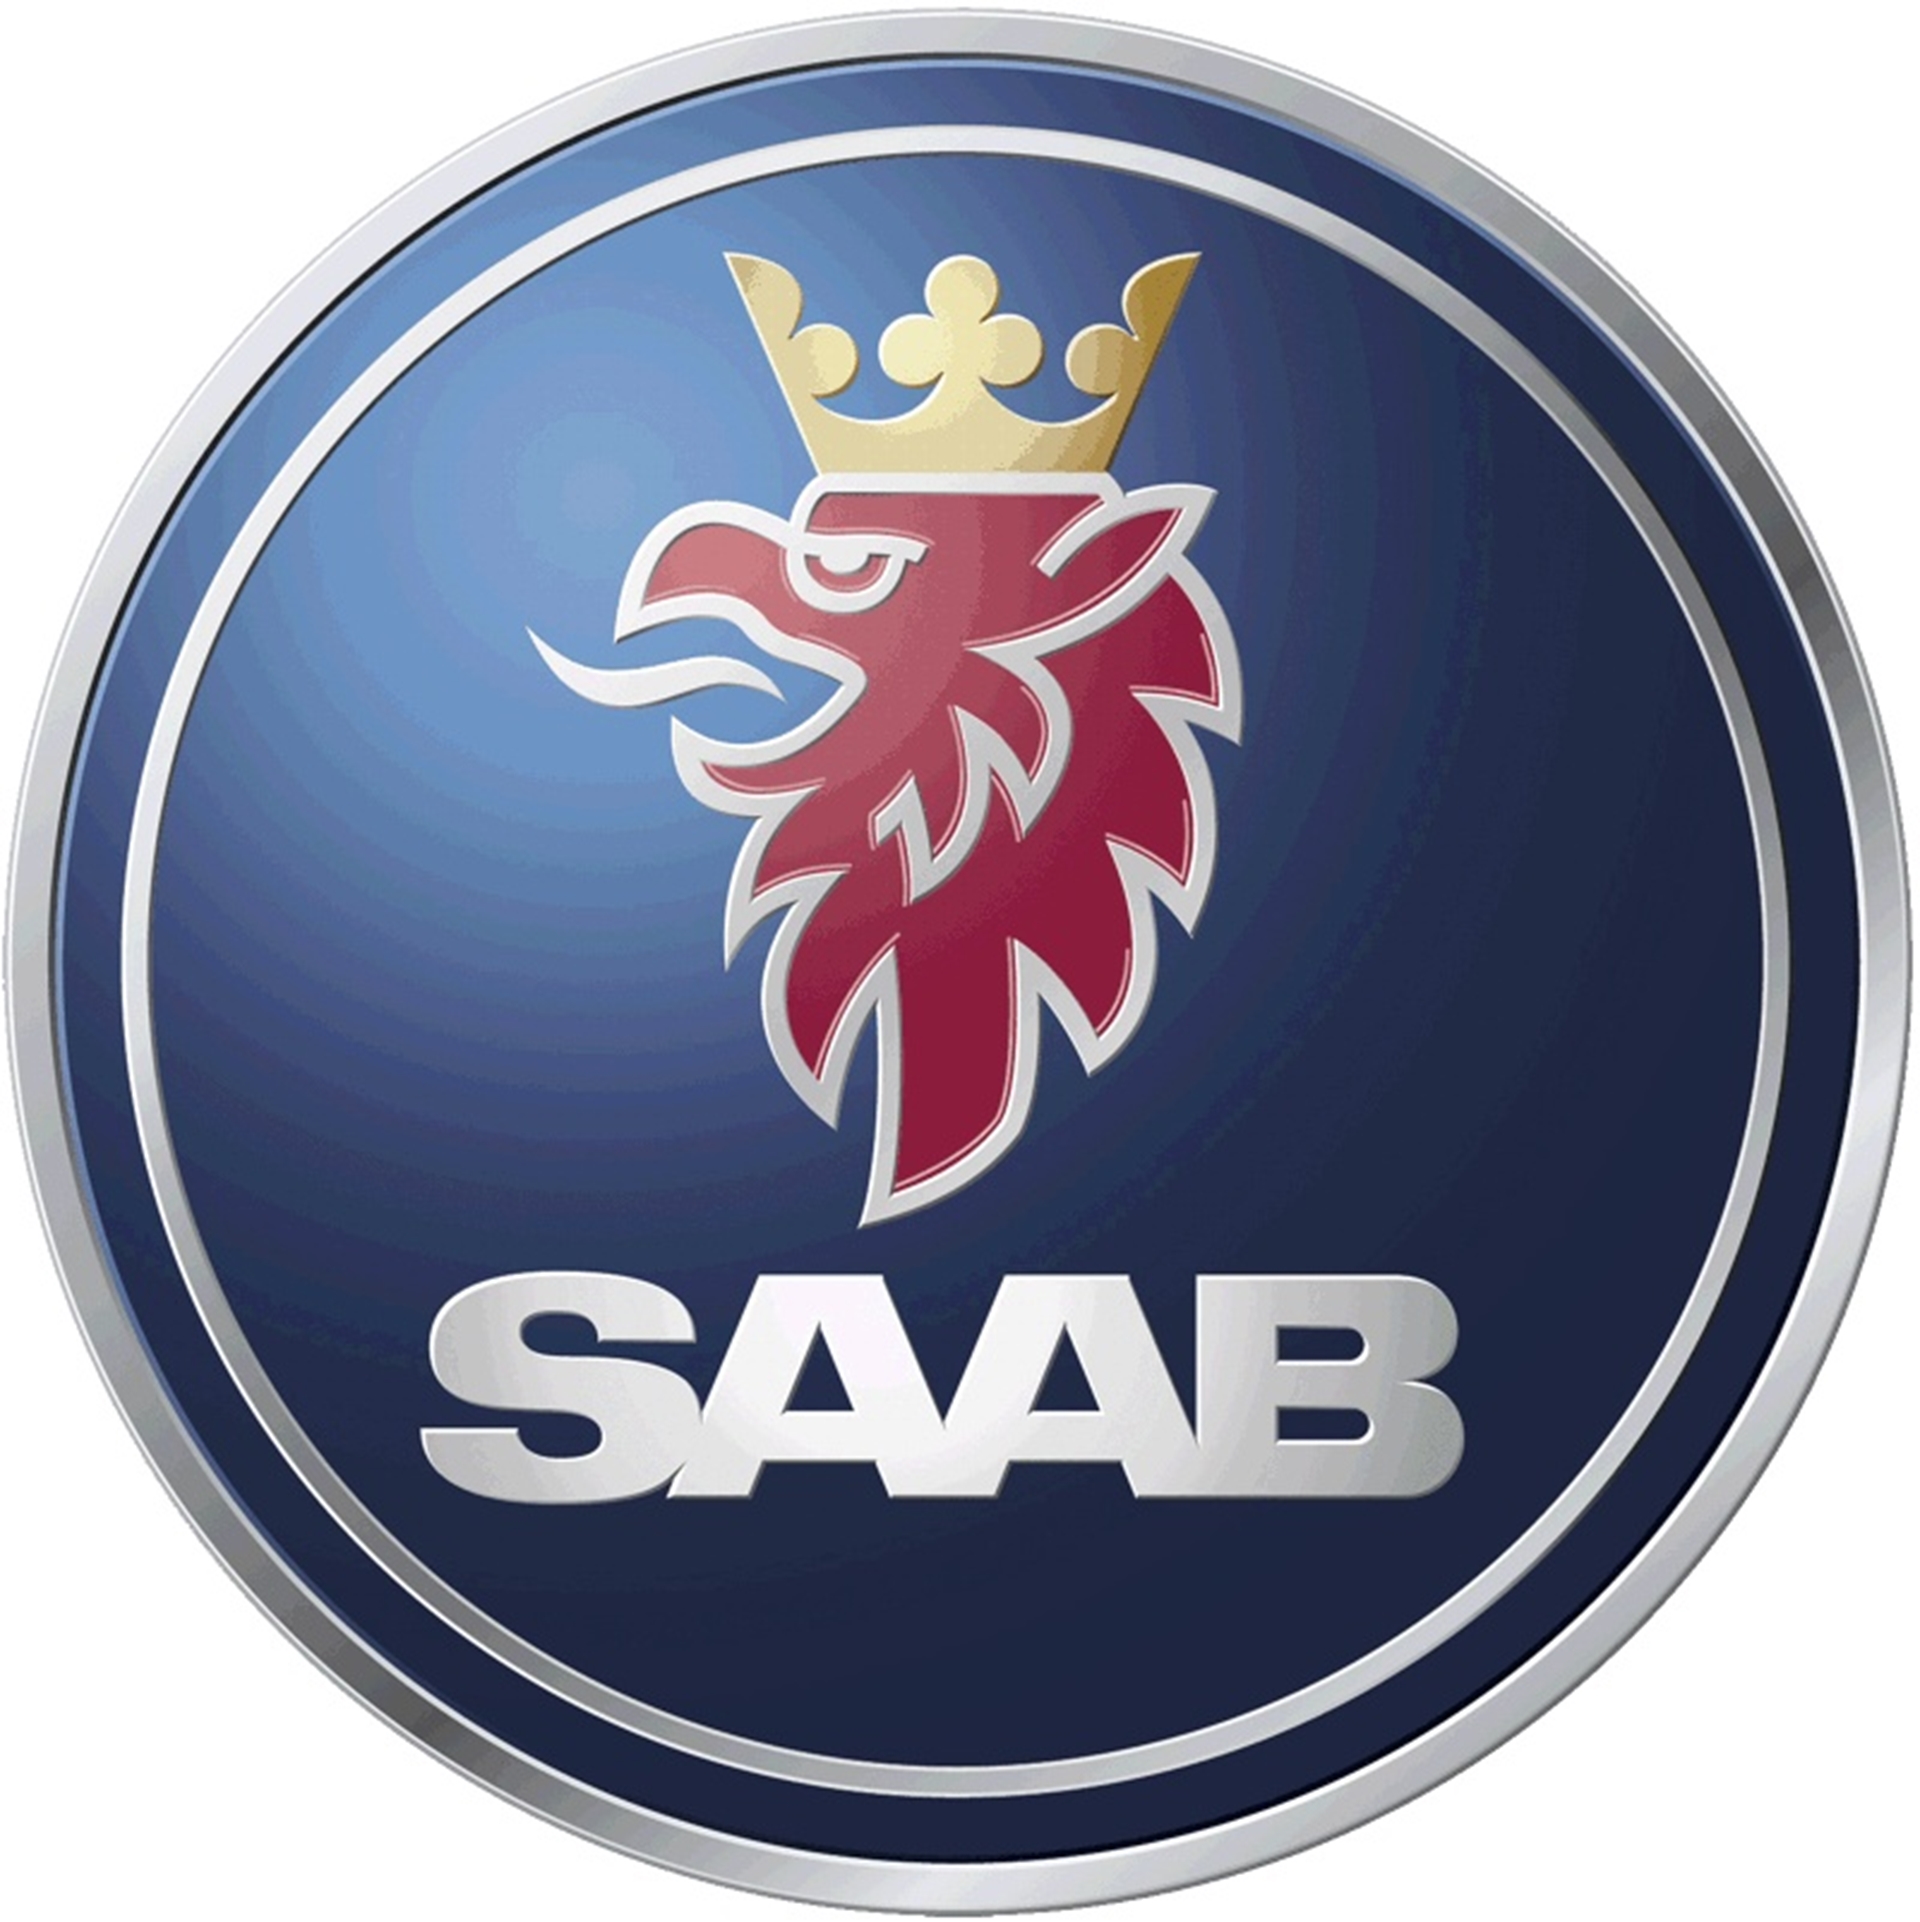 NEW SAAB SERVICE CENTRE OPENS IN CANTERBURY